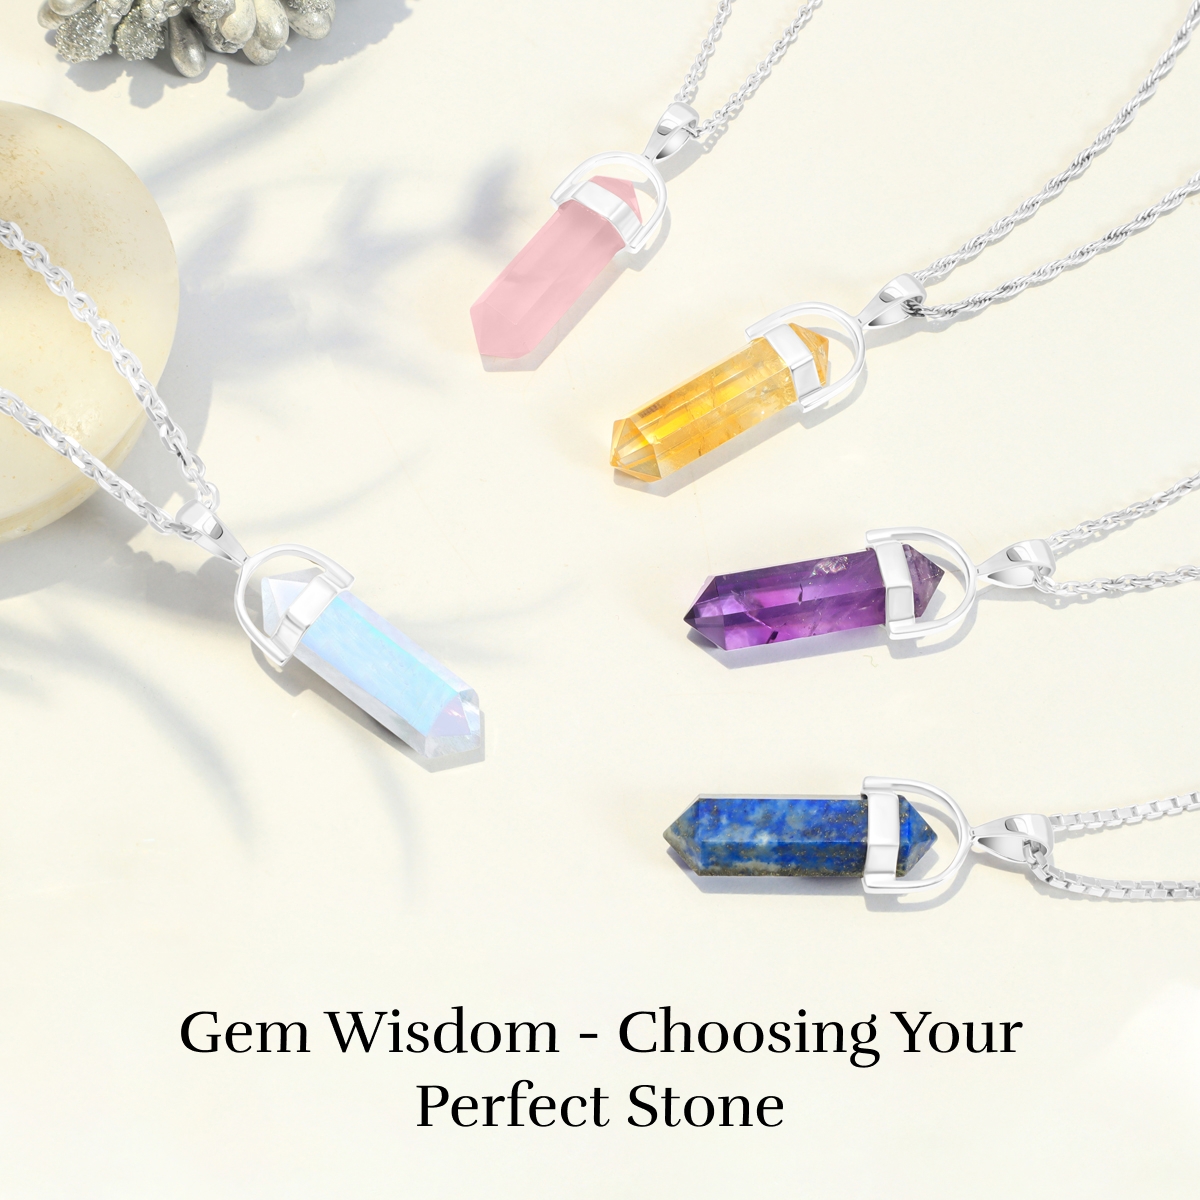 How to select the right Gemstone for yourself